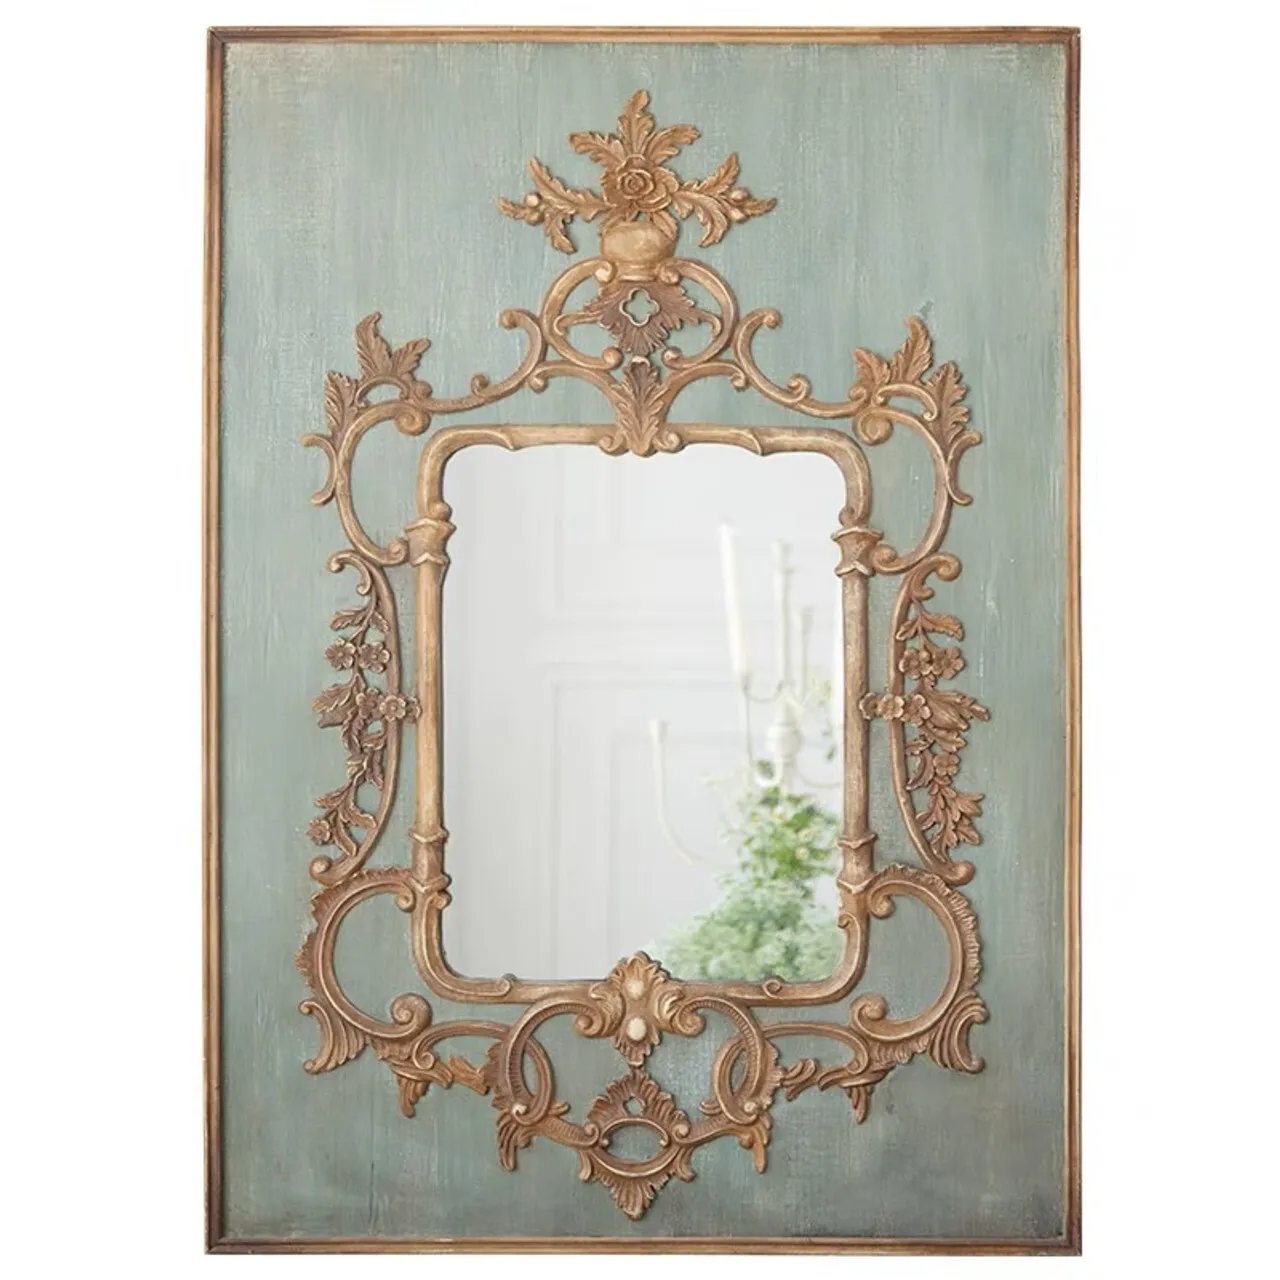 Antique Vintage Style Wall Mirror Carved Wood Frame